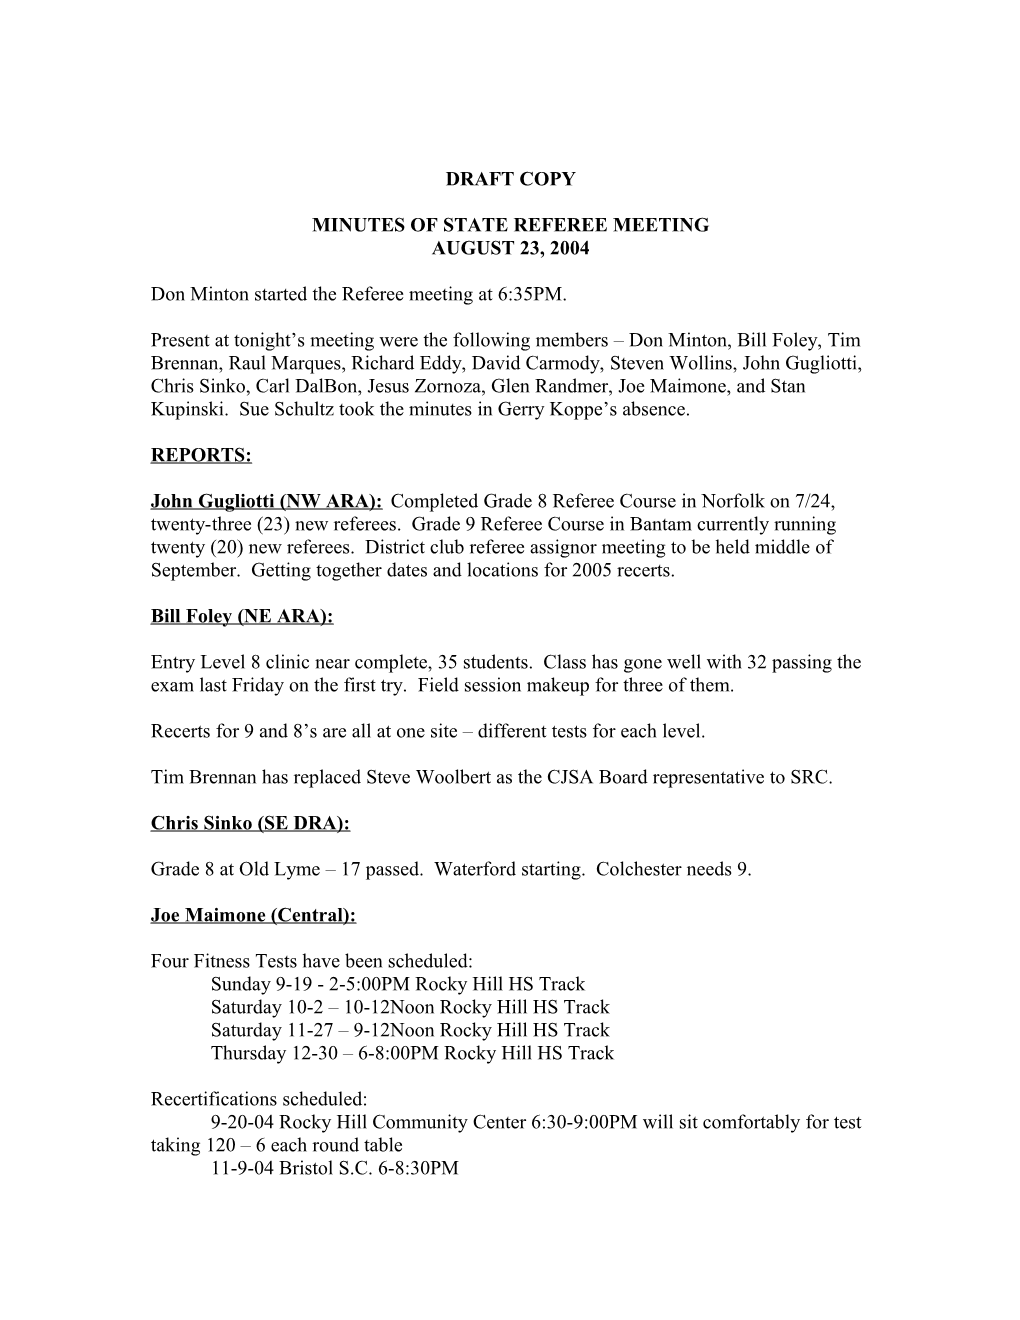 Minutes of State Referee Meeting